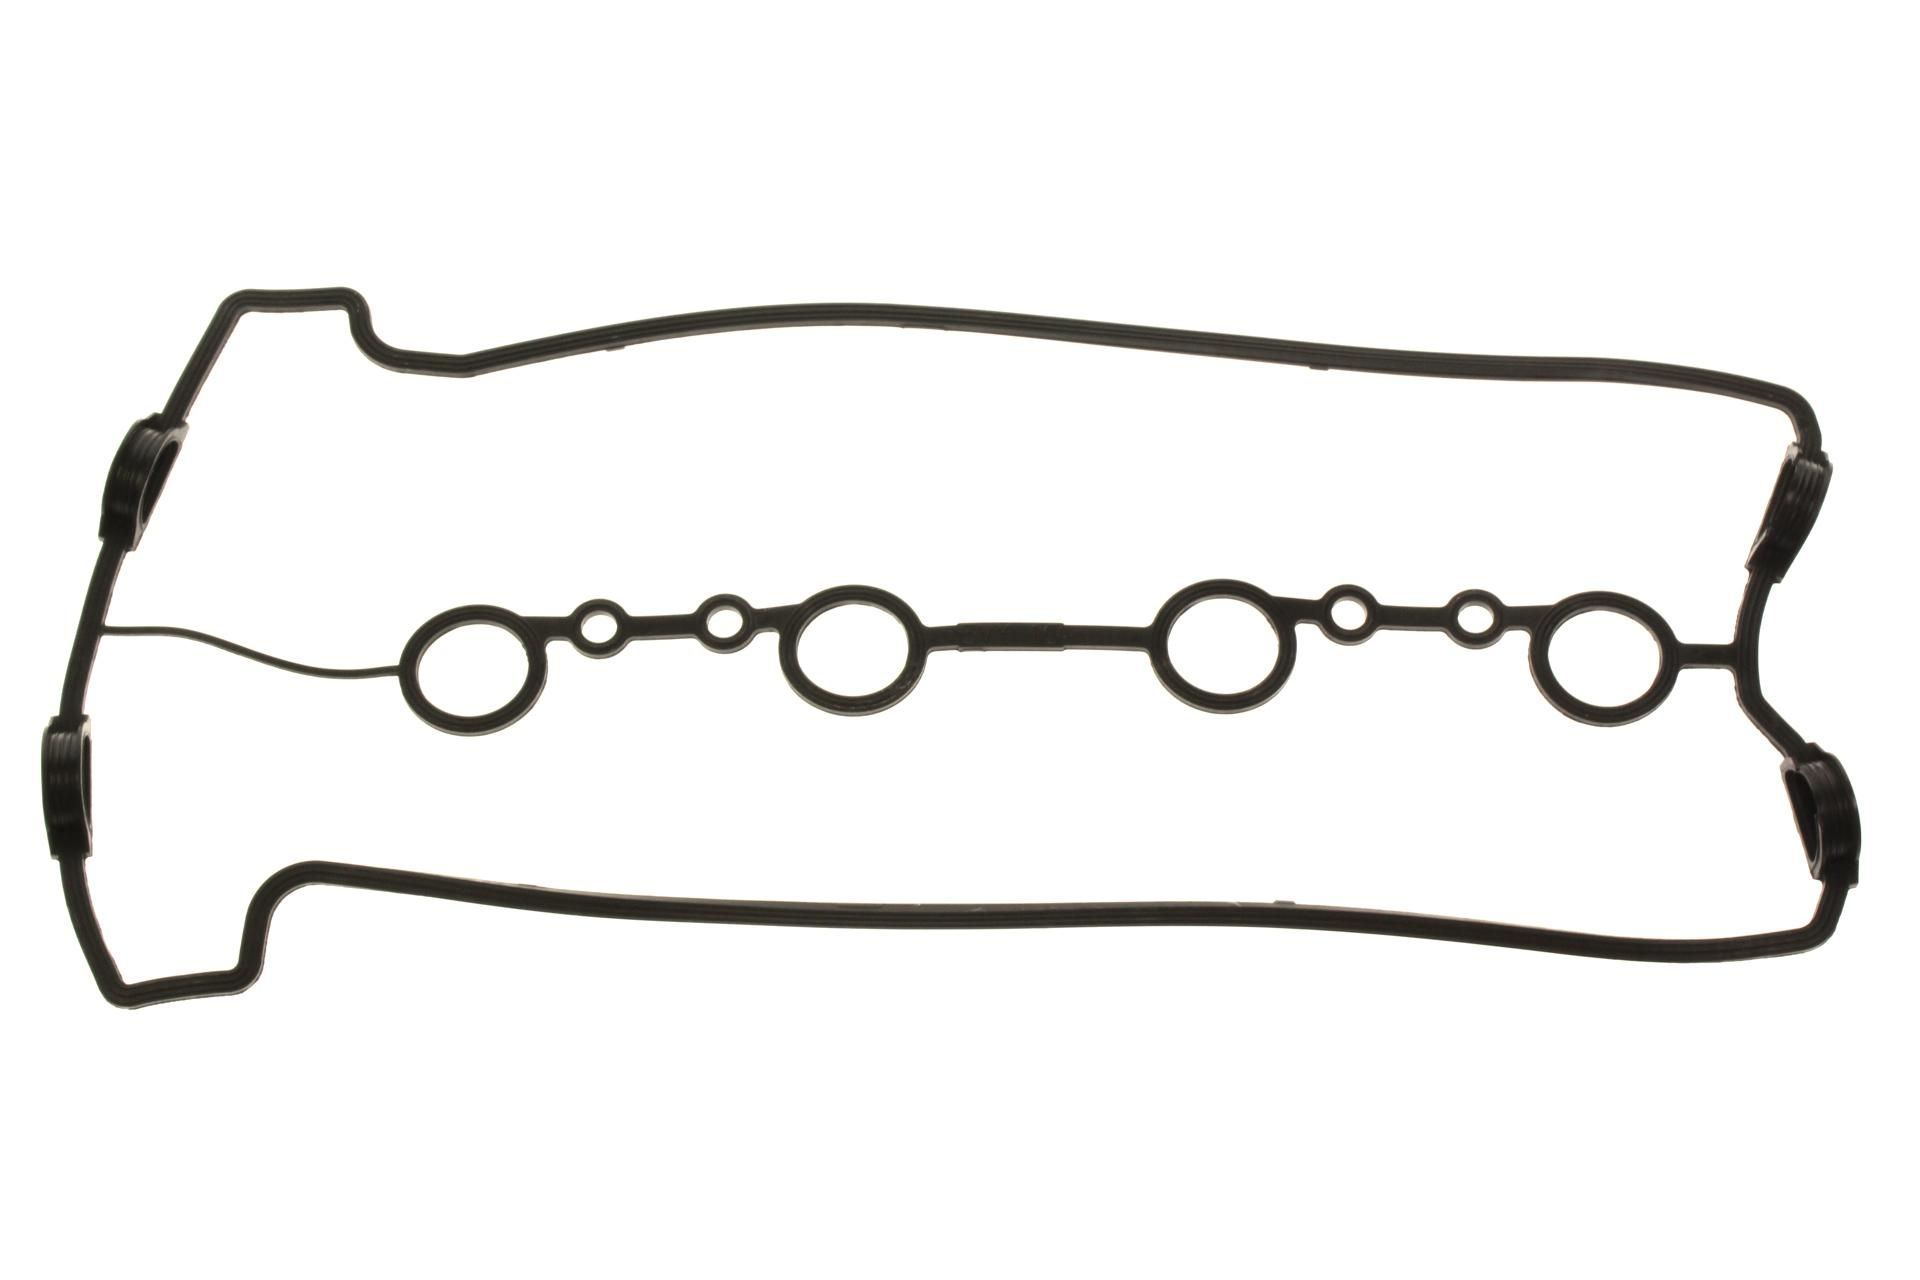 5VY-11193-10-00 HEAD COVER GASKET